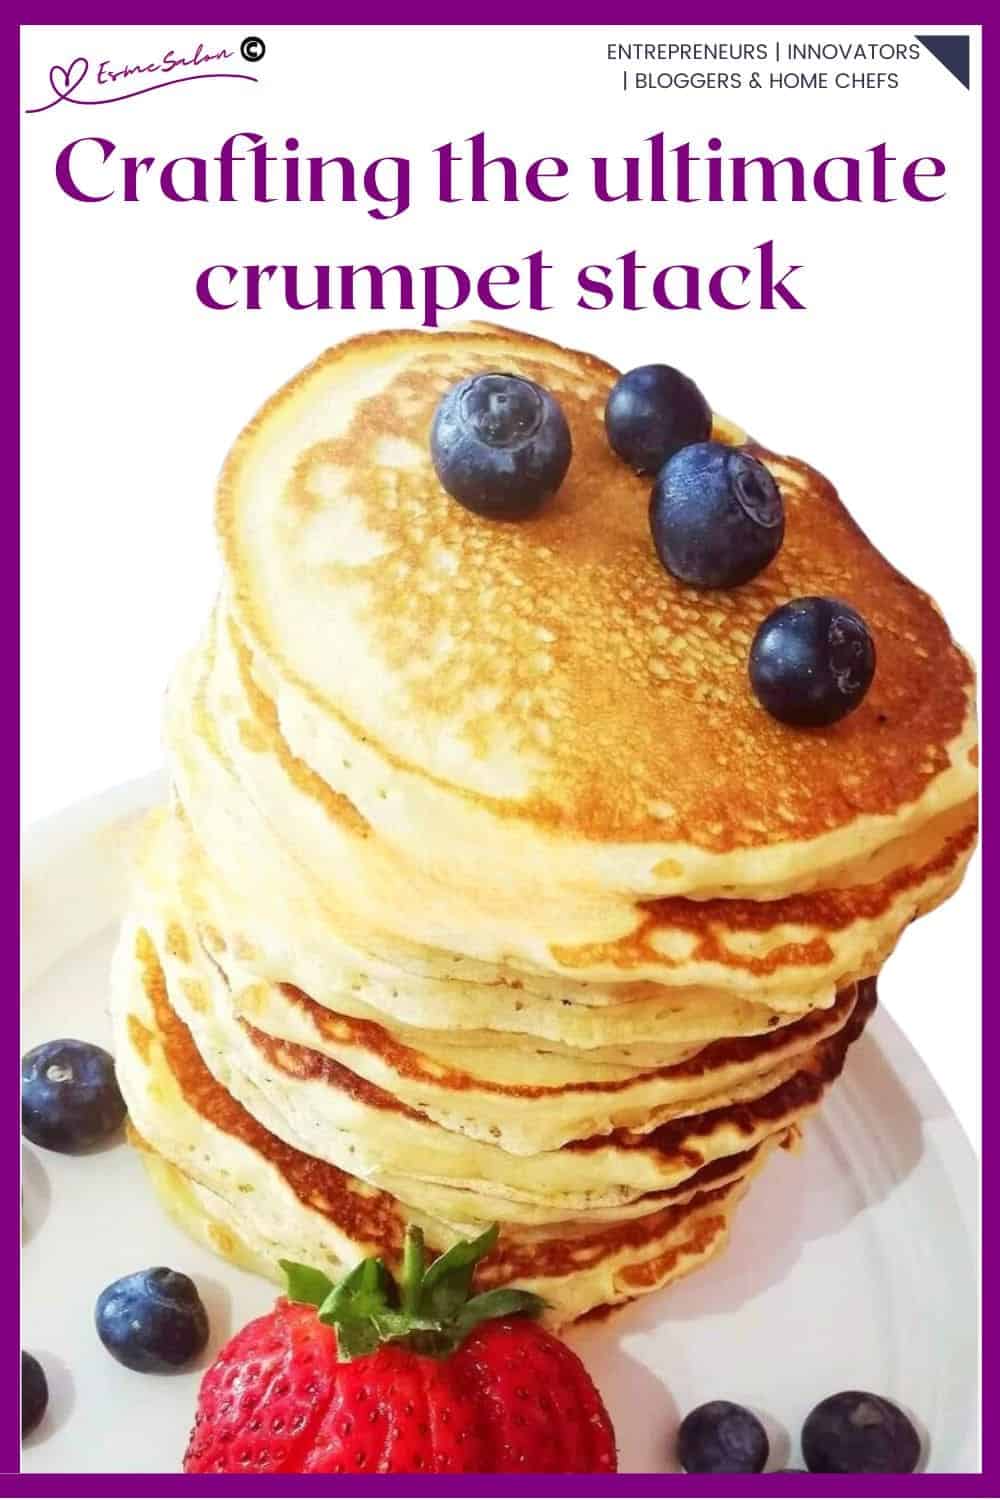 an image of a stack of crumpets with blueberries and strawberries